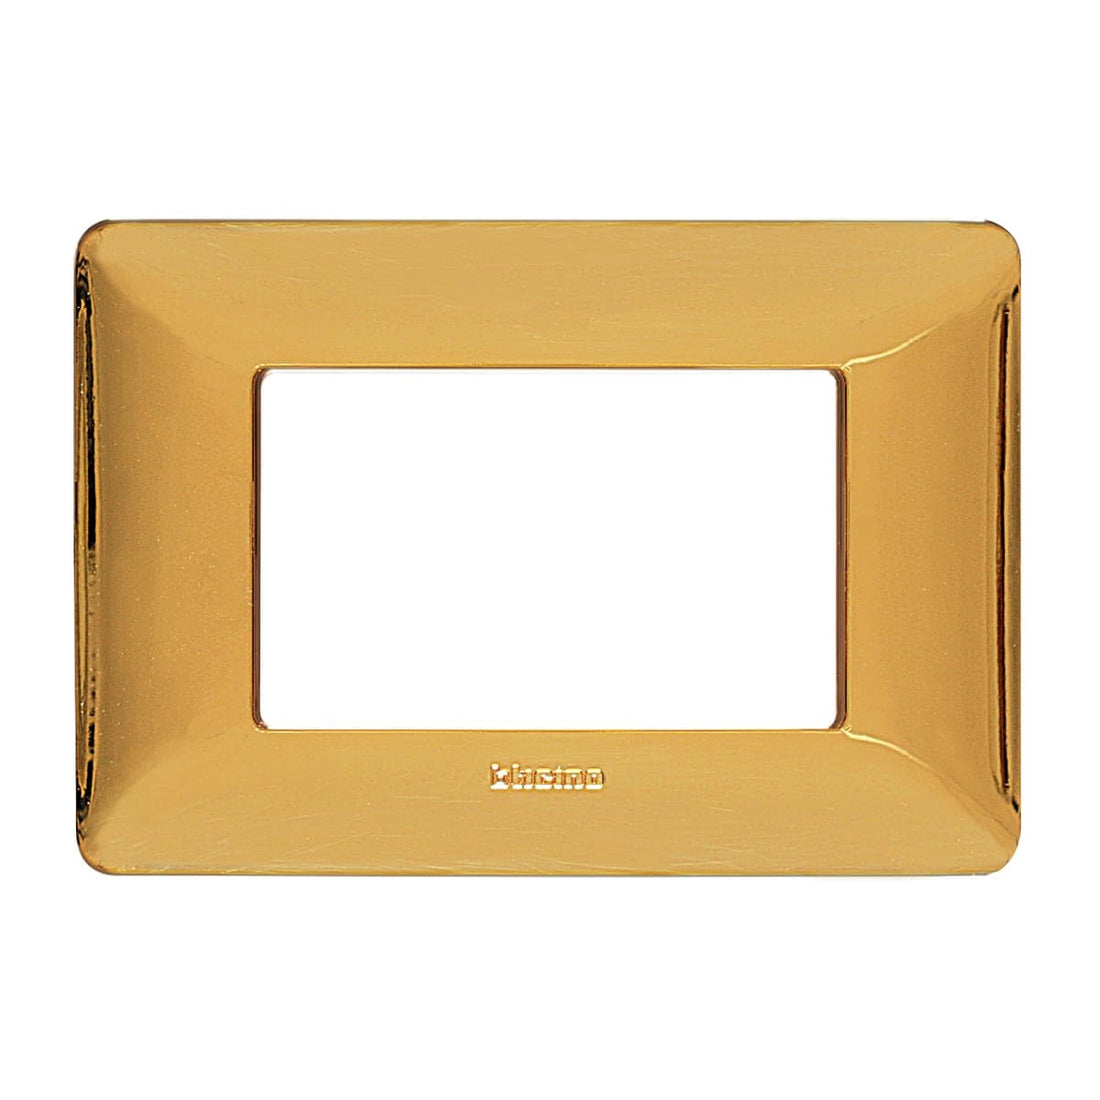 MATIX PLATE 3 PLACES POLISHED GOLD - best price from Maltashopper.com BR420100039